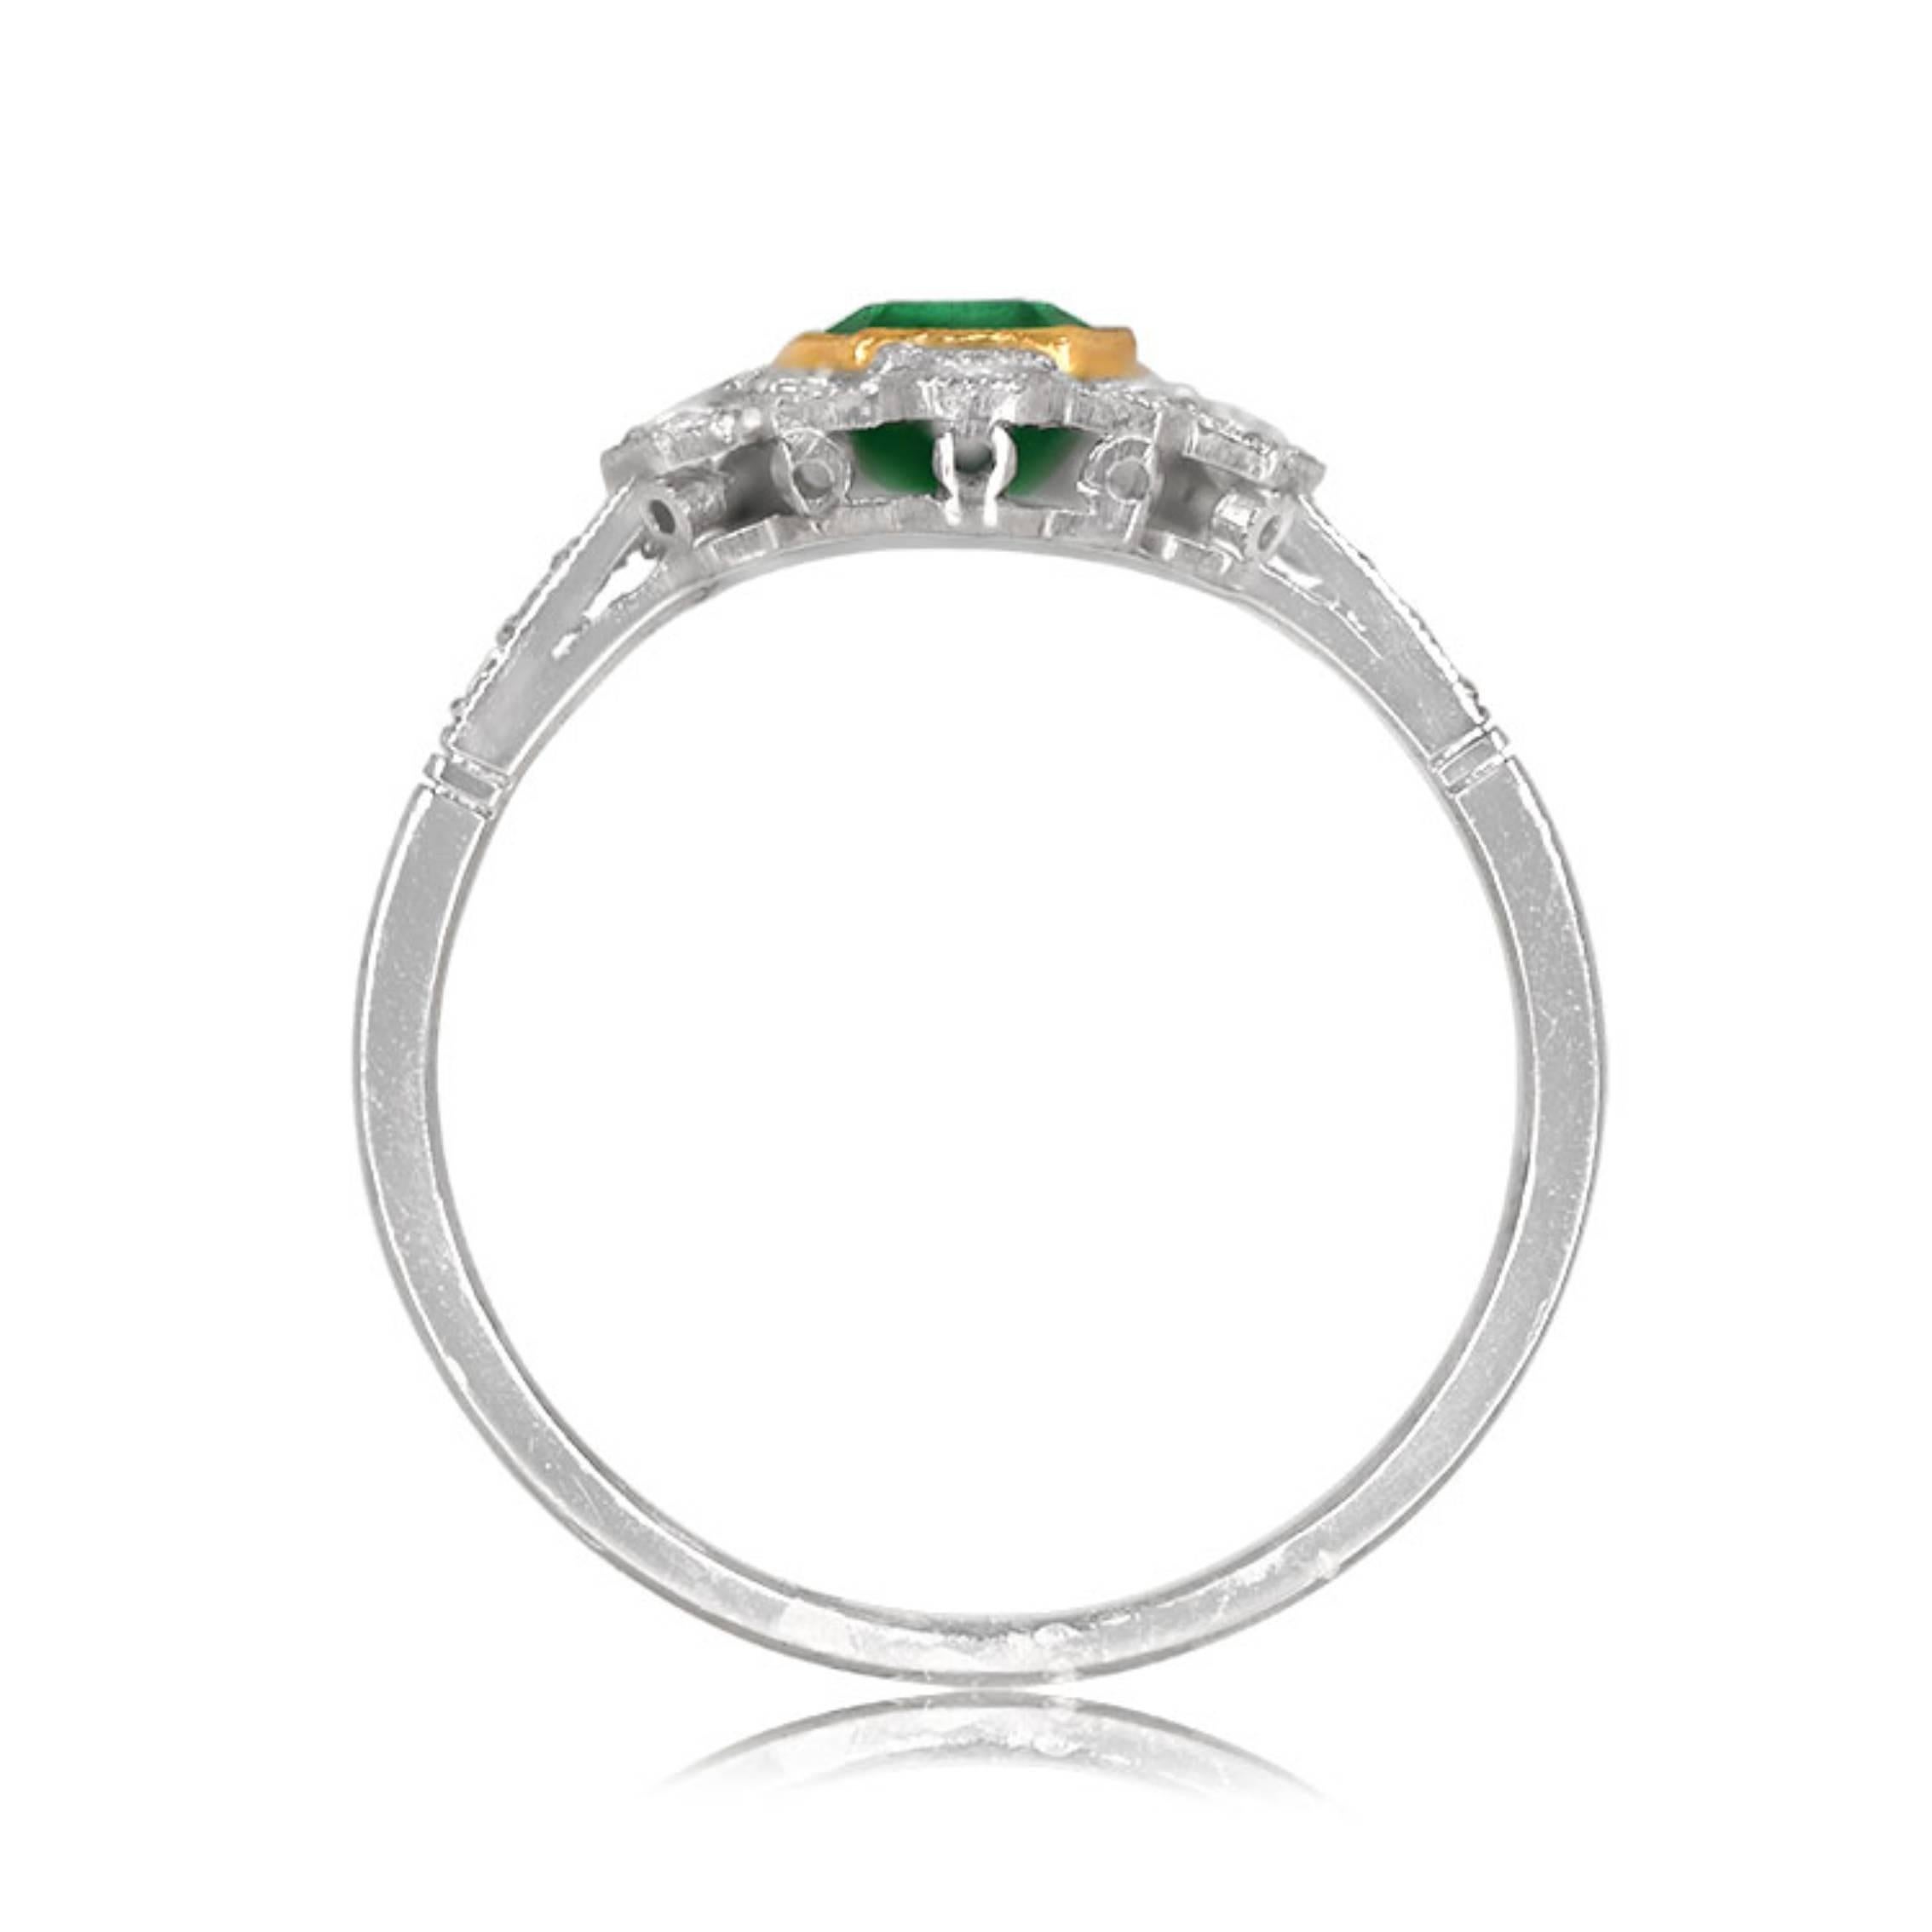 1ct Emerald Cut Natural Colombian Emerald Cocktail Ring, Yellow Gold & Platinum In Excellent Condition For Sale In New York, NY